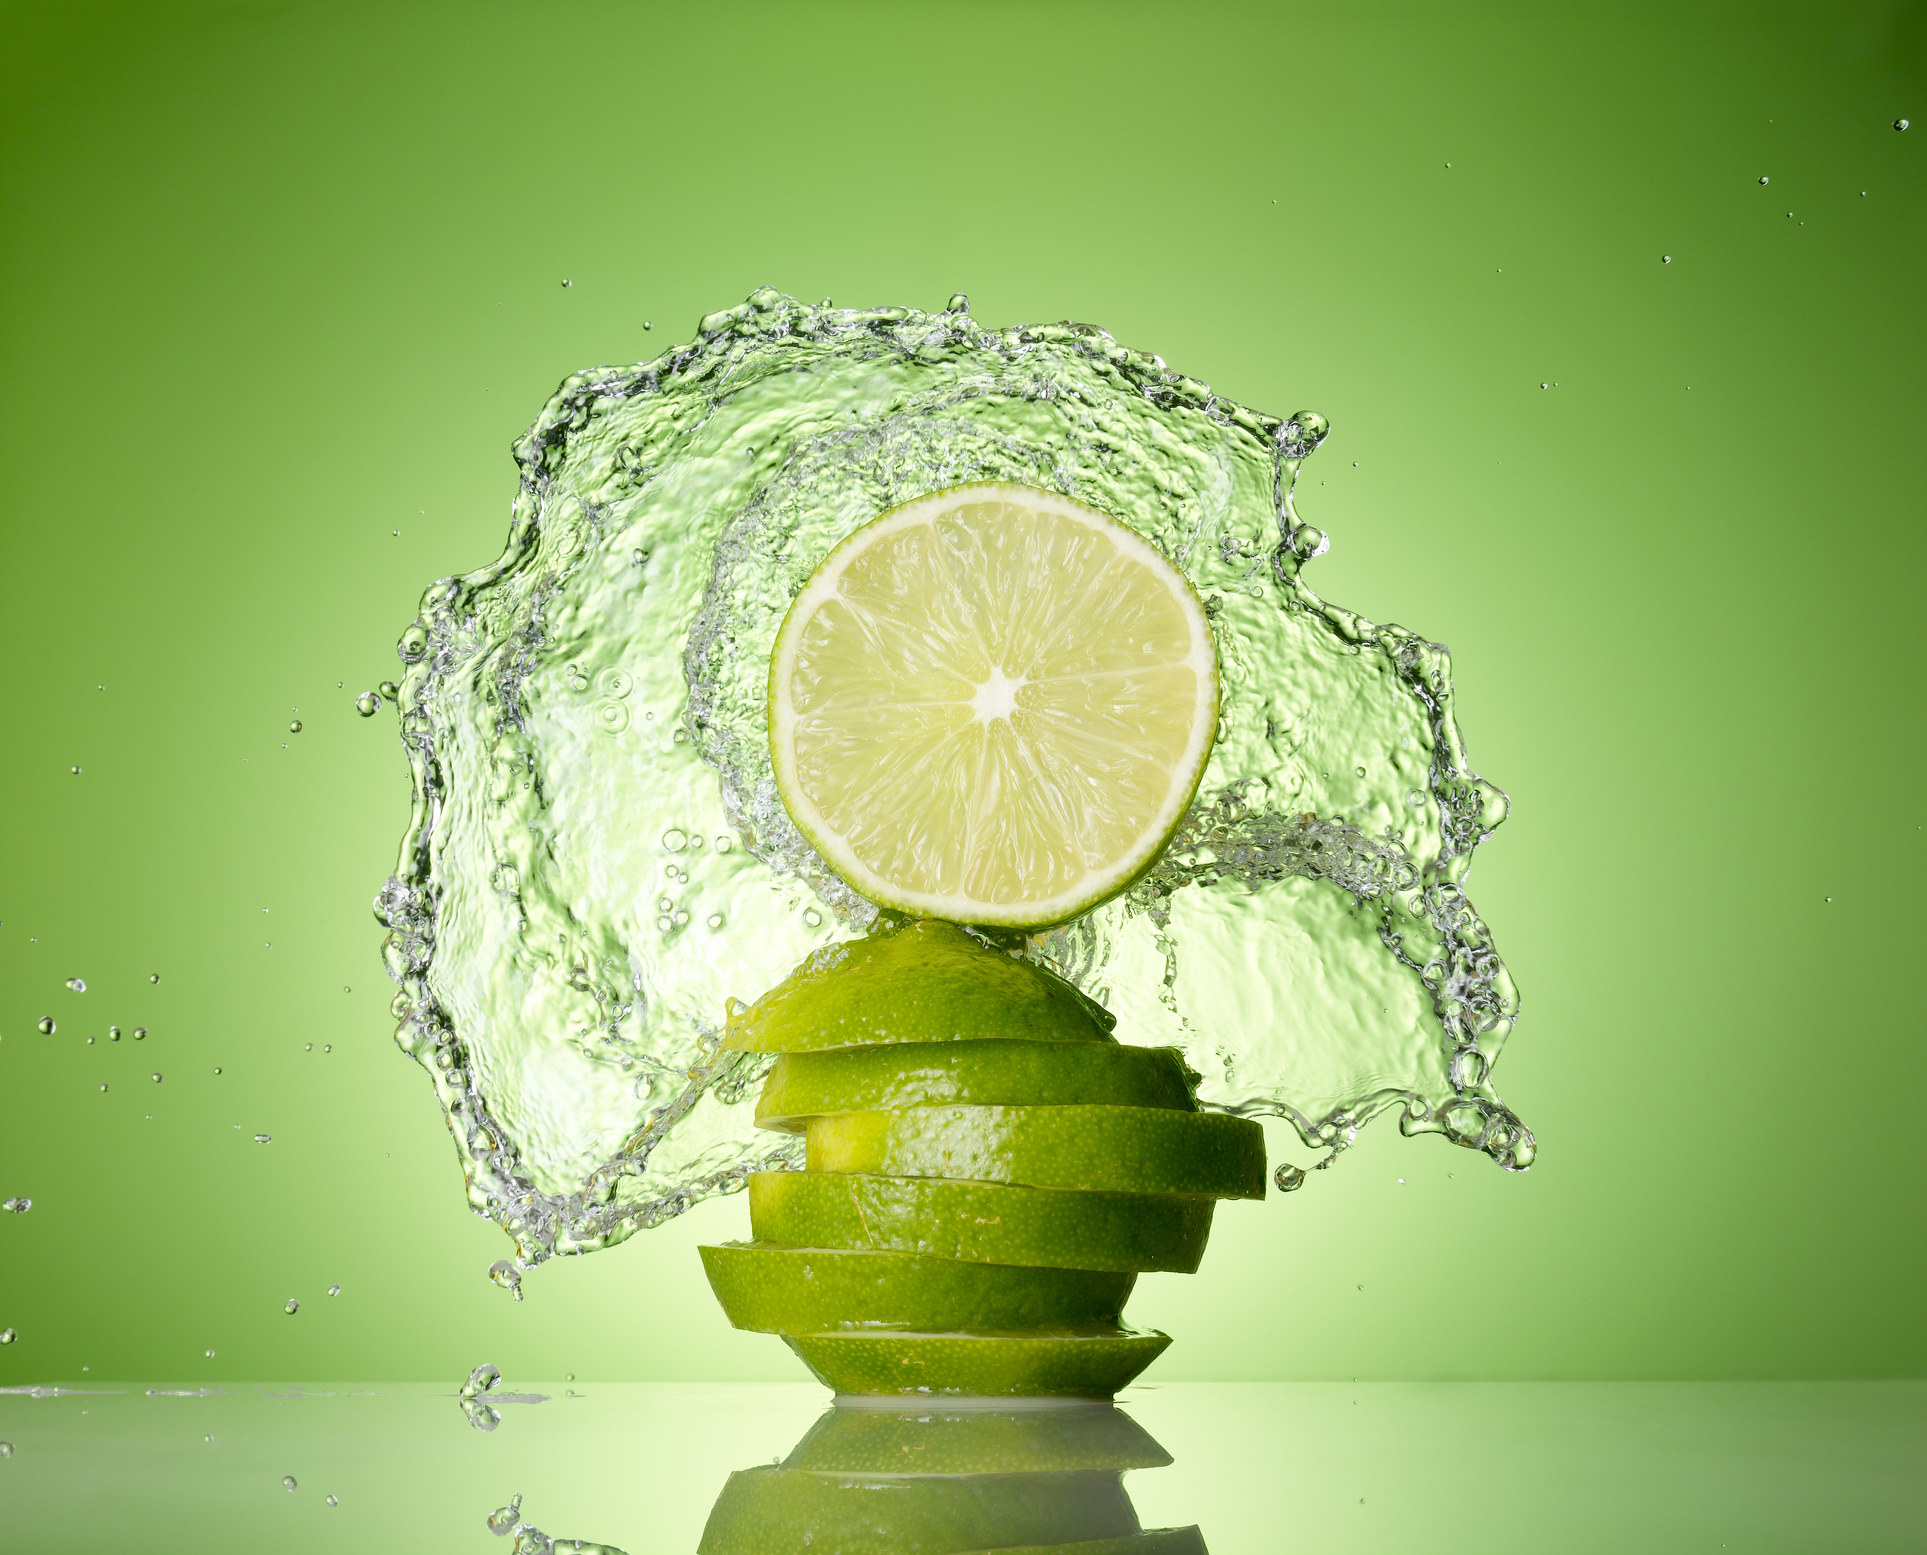 Lime on green background with water splash